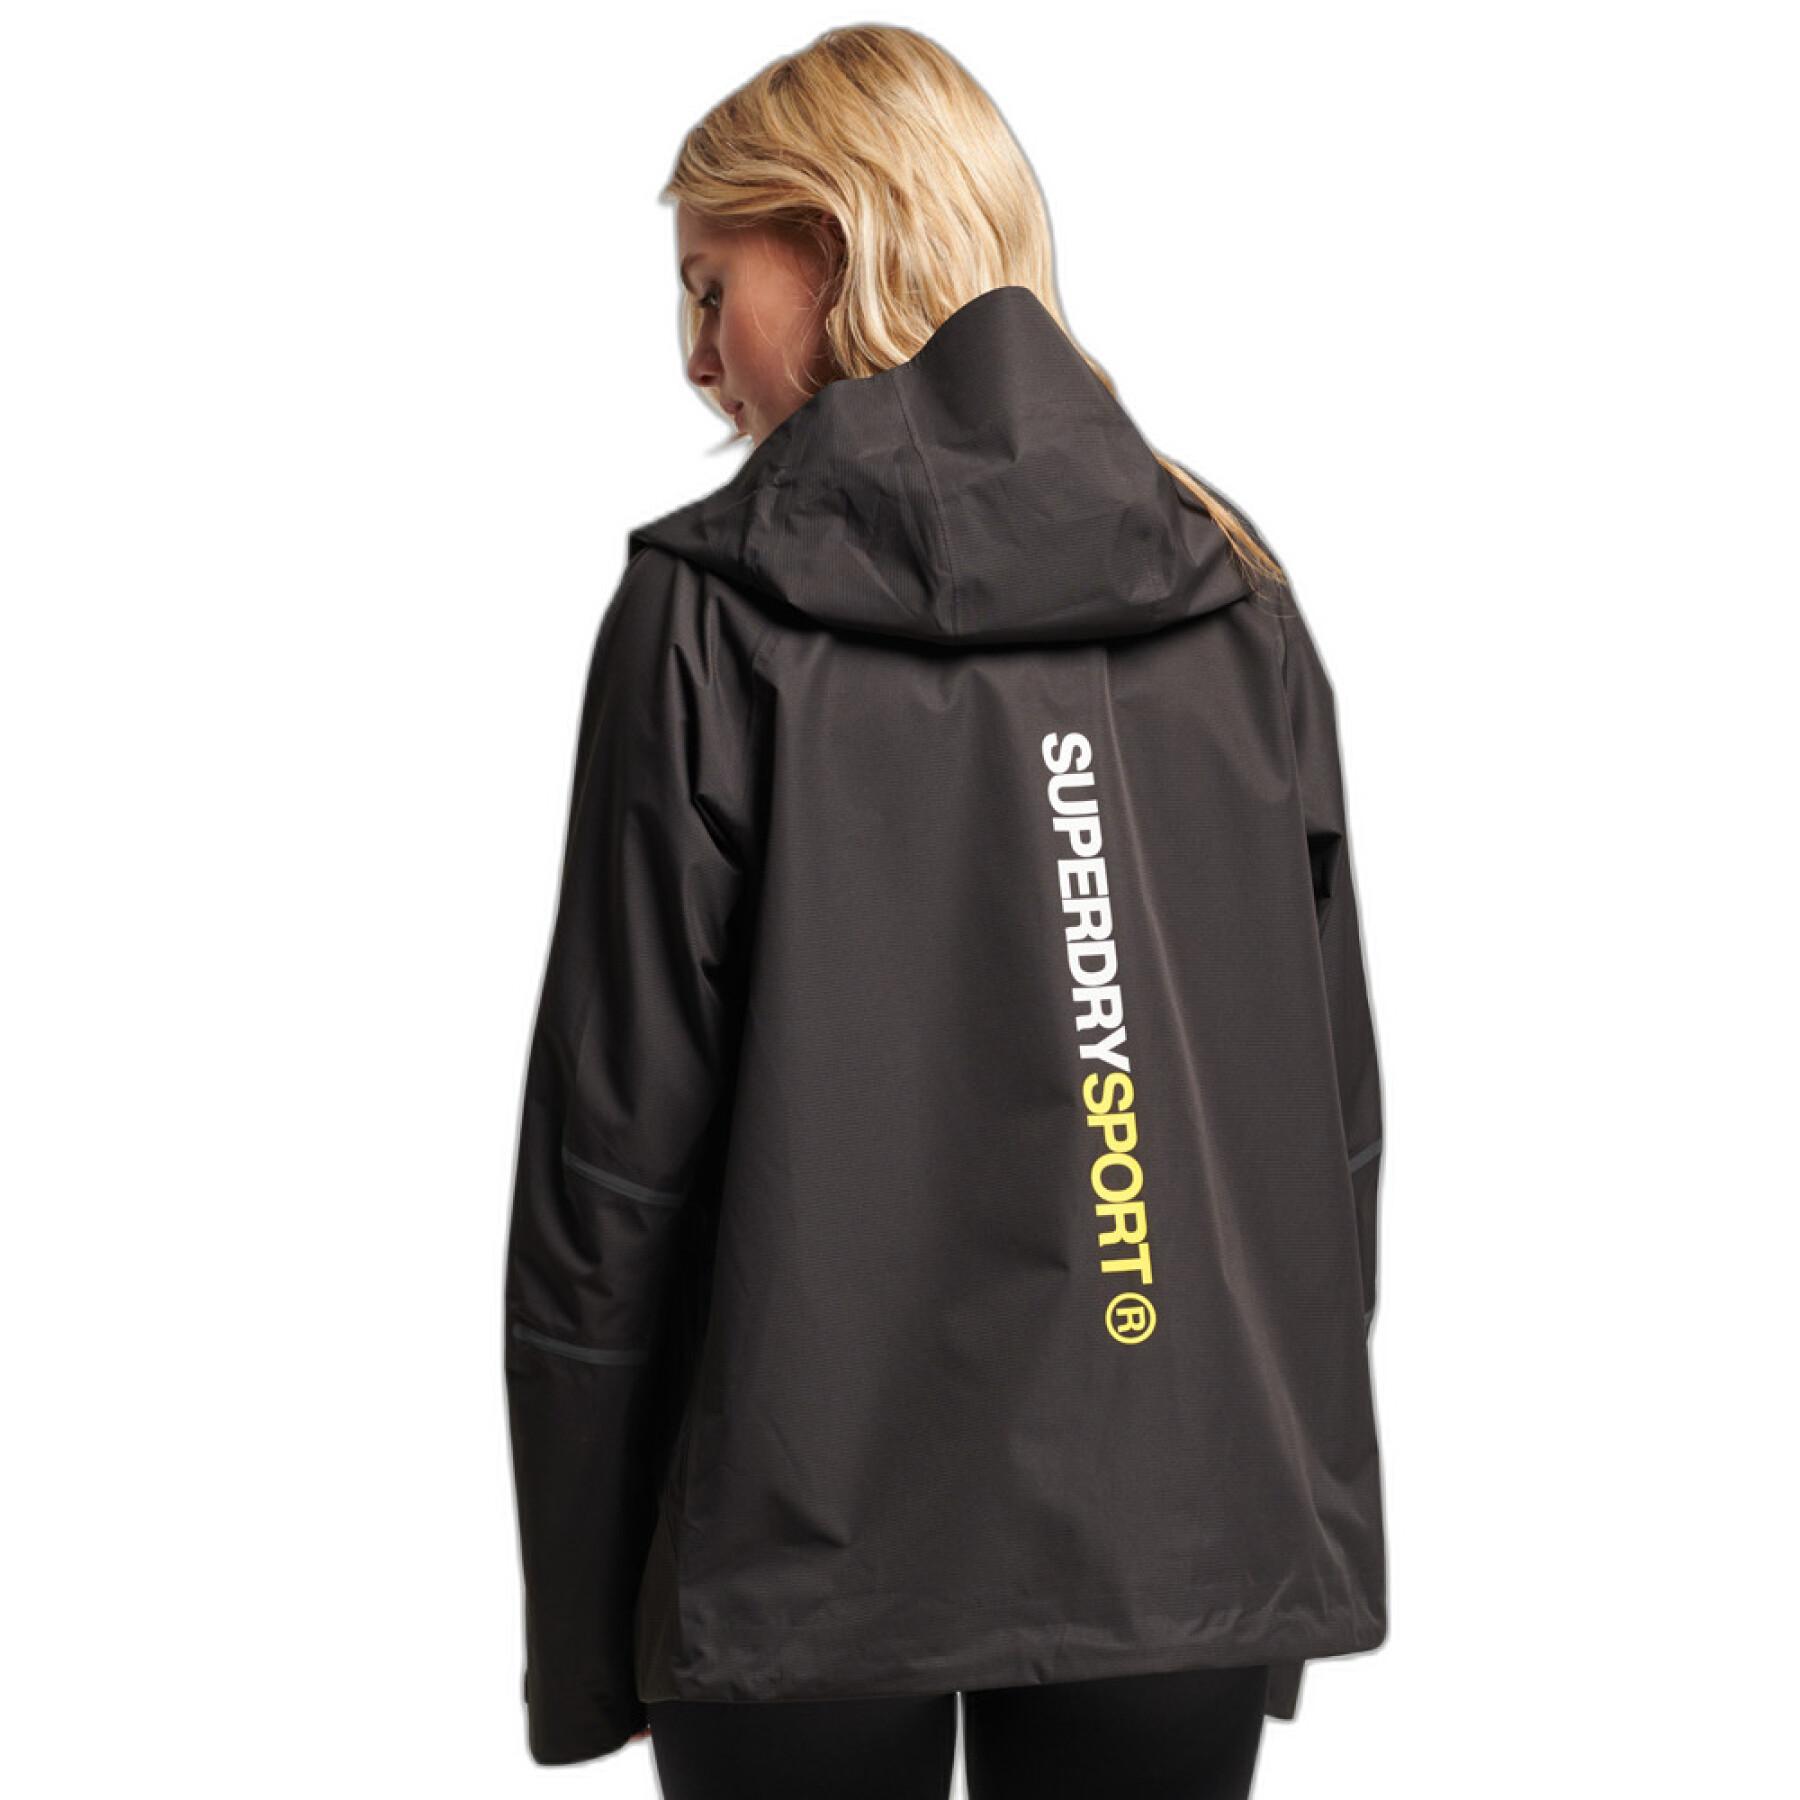 Chaqueta impermeable mujer Superdry